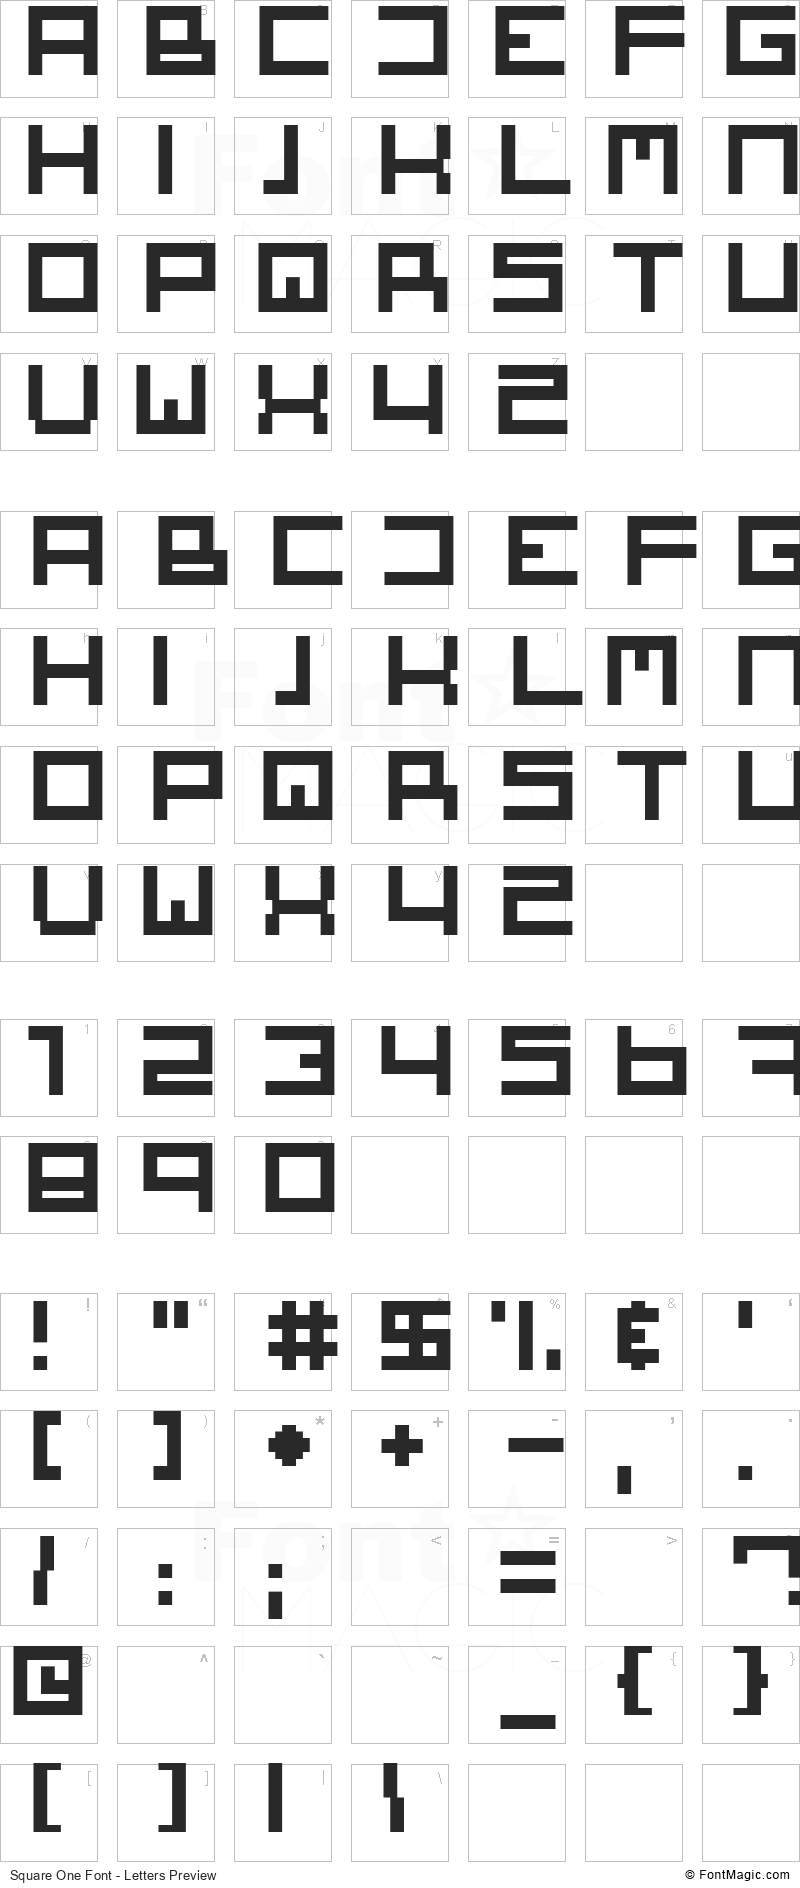 Square One Font - All Latters Preview Chart